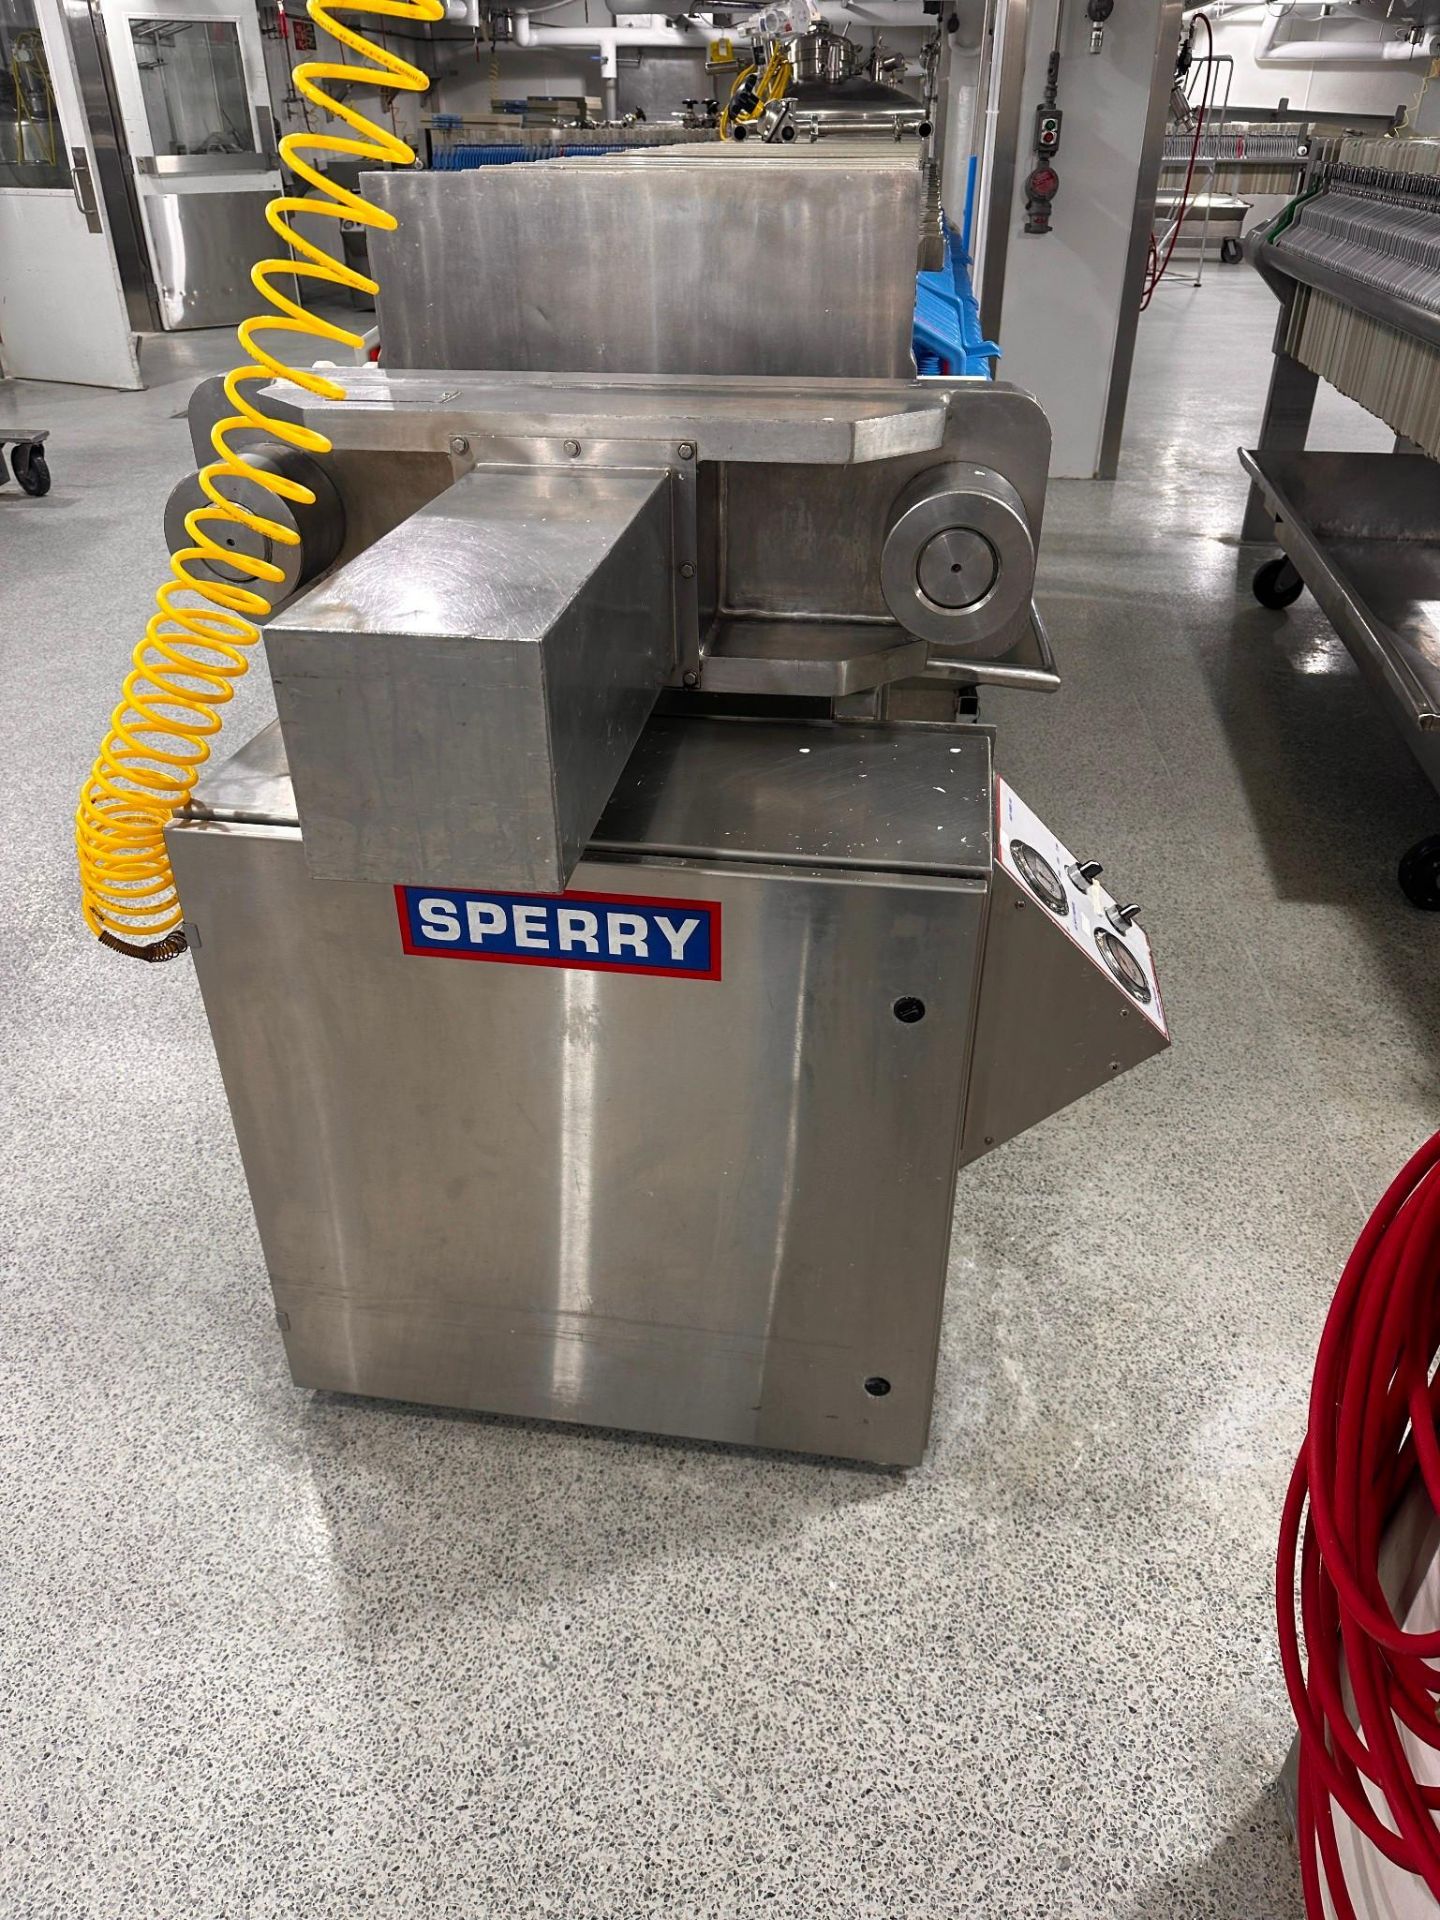 S/S SPERRY FILTER PRESS SERIAL X54223M - Image 4 of 6